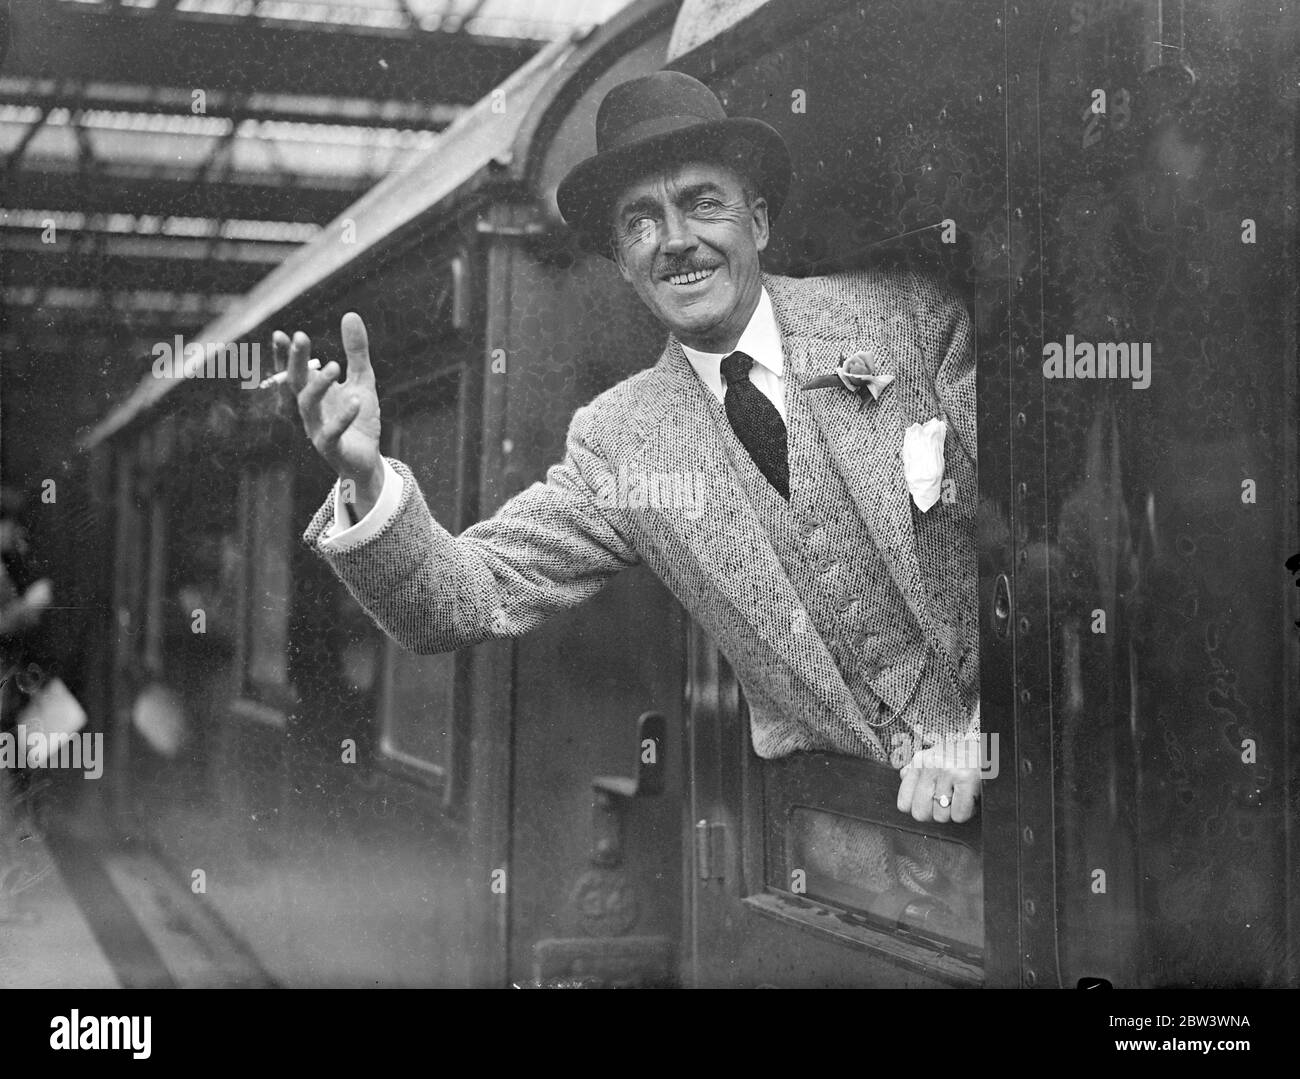 PLA Official Leaves For South Africa To Boost Trade With London . Mr . A . E . Wildey , Public Relations Officer of the Port of London Authority , left Waterloo Station on the  Stirling Castle  boat train for South Africa where he is undertaking a mission to foster trade between London and South Africa . Photo shows : Mr . A . E . Wildey in his carriage window at Waterloo . 21 Aug 1936 Stock Photo